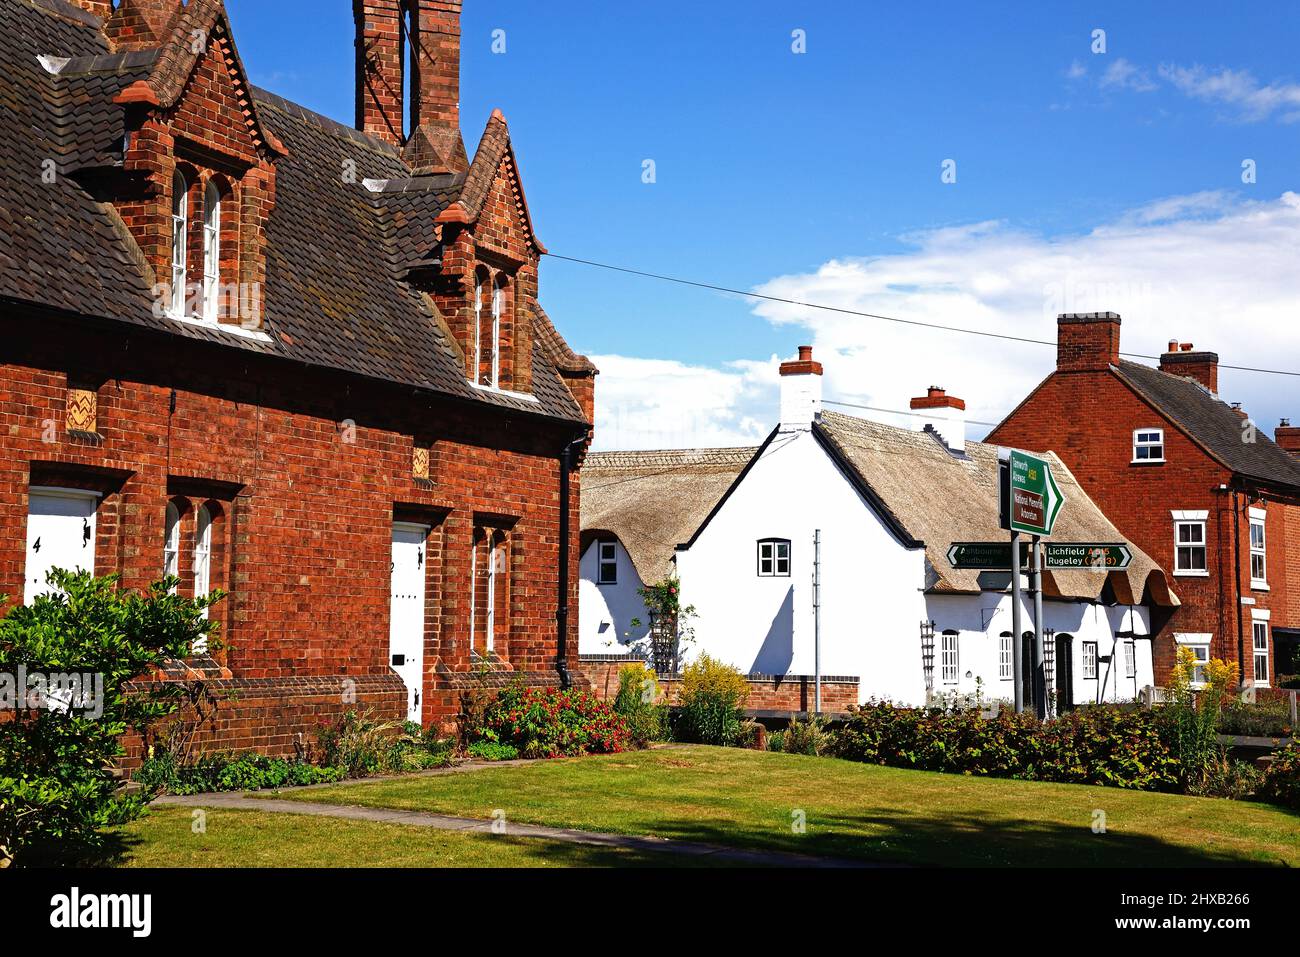 Pretty traditional English buildings in the village centre, Kings Bromley, Staffordshire, England, UK, Europe. Stock Photo